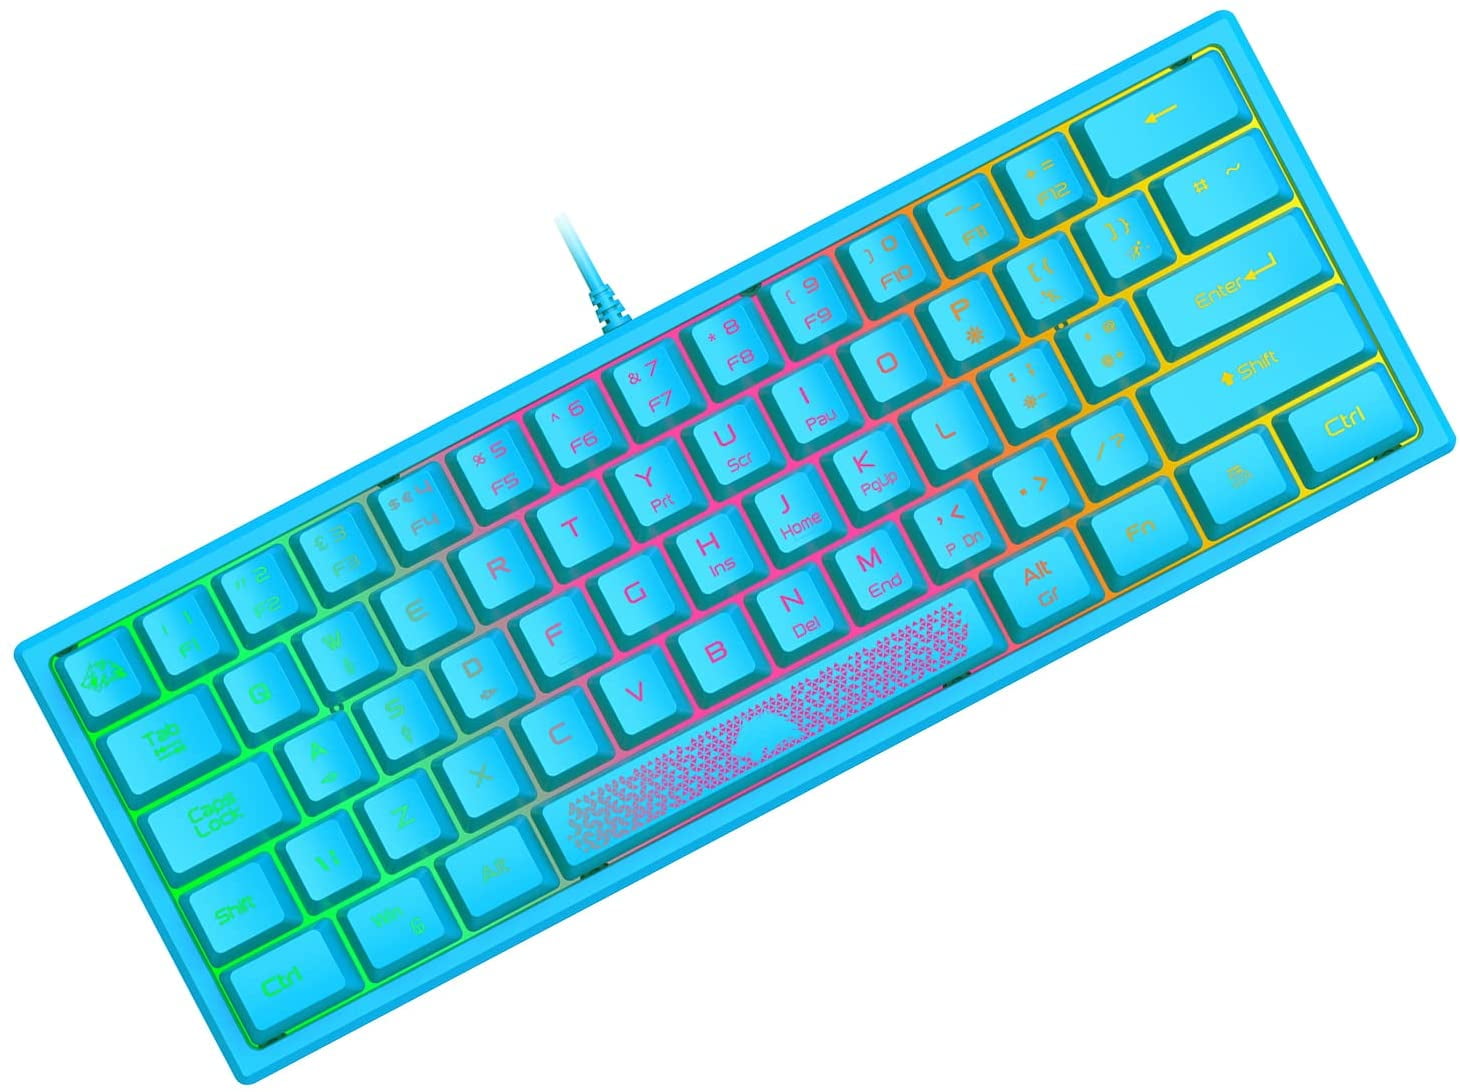 ZIYOULANG K61 60% Gaming Keyboard, Compact RGB Backlit Wired Waterproof,  for PS4 XBOX PC Laptop Mac